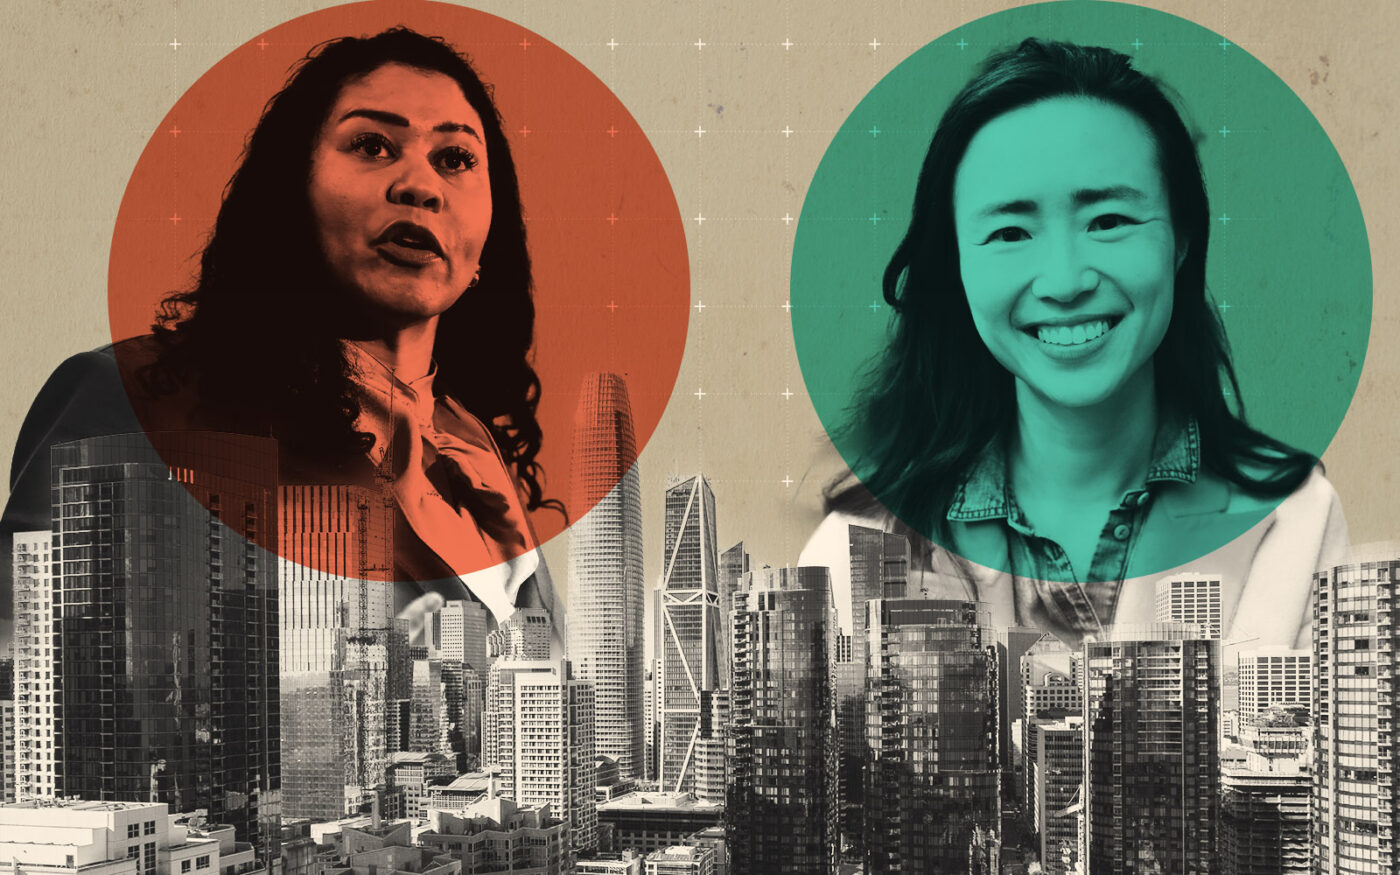 San Francisco mayor London Breed and District 1 Supervisor Connie Chan (Getty, Connie Chan for Supervisor)